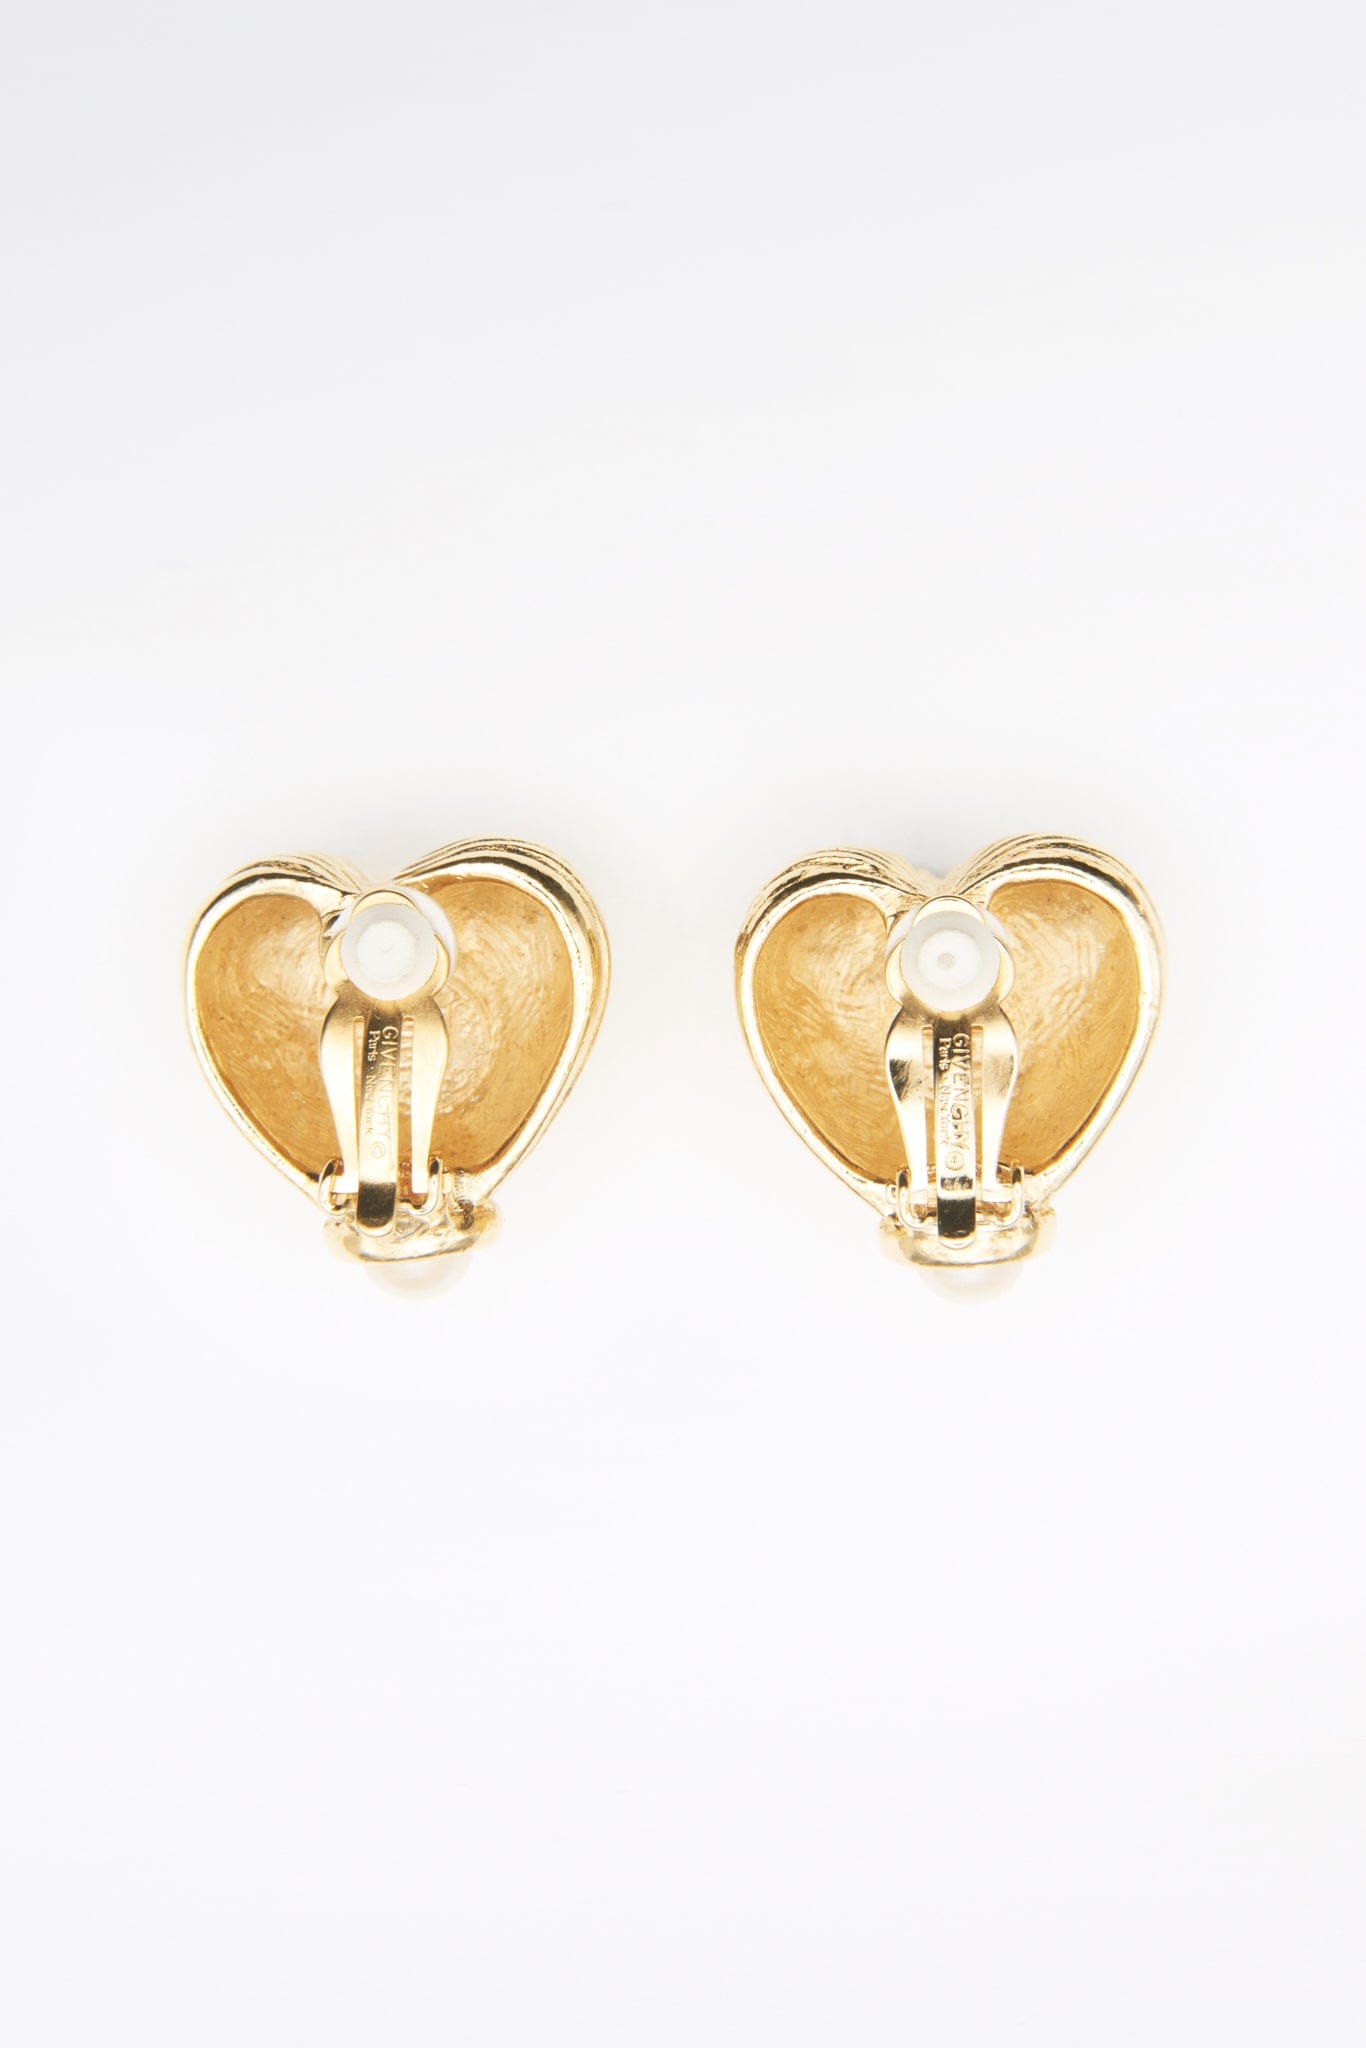 Vintage Gold Givenchy Heart and Imitation Pearl Earrings